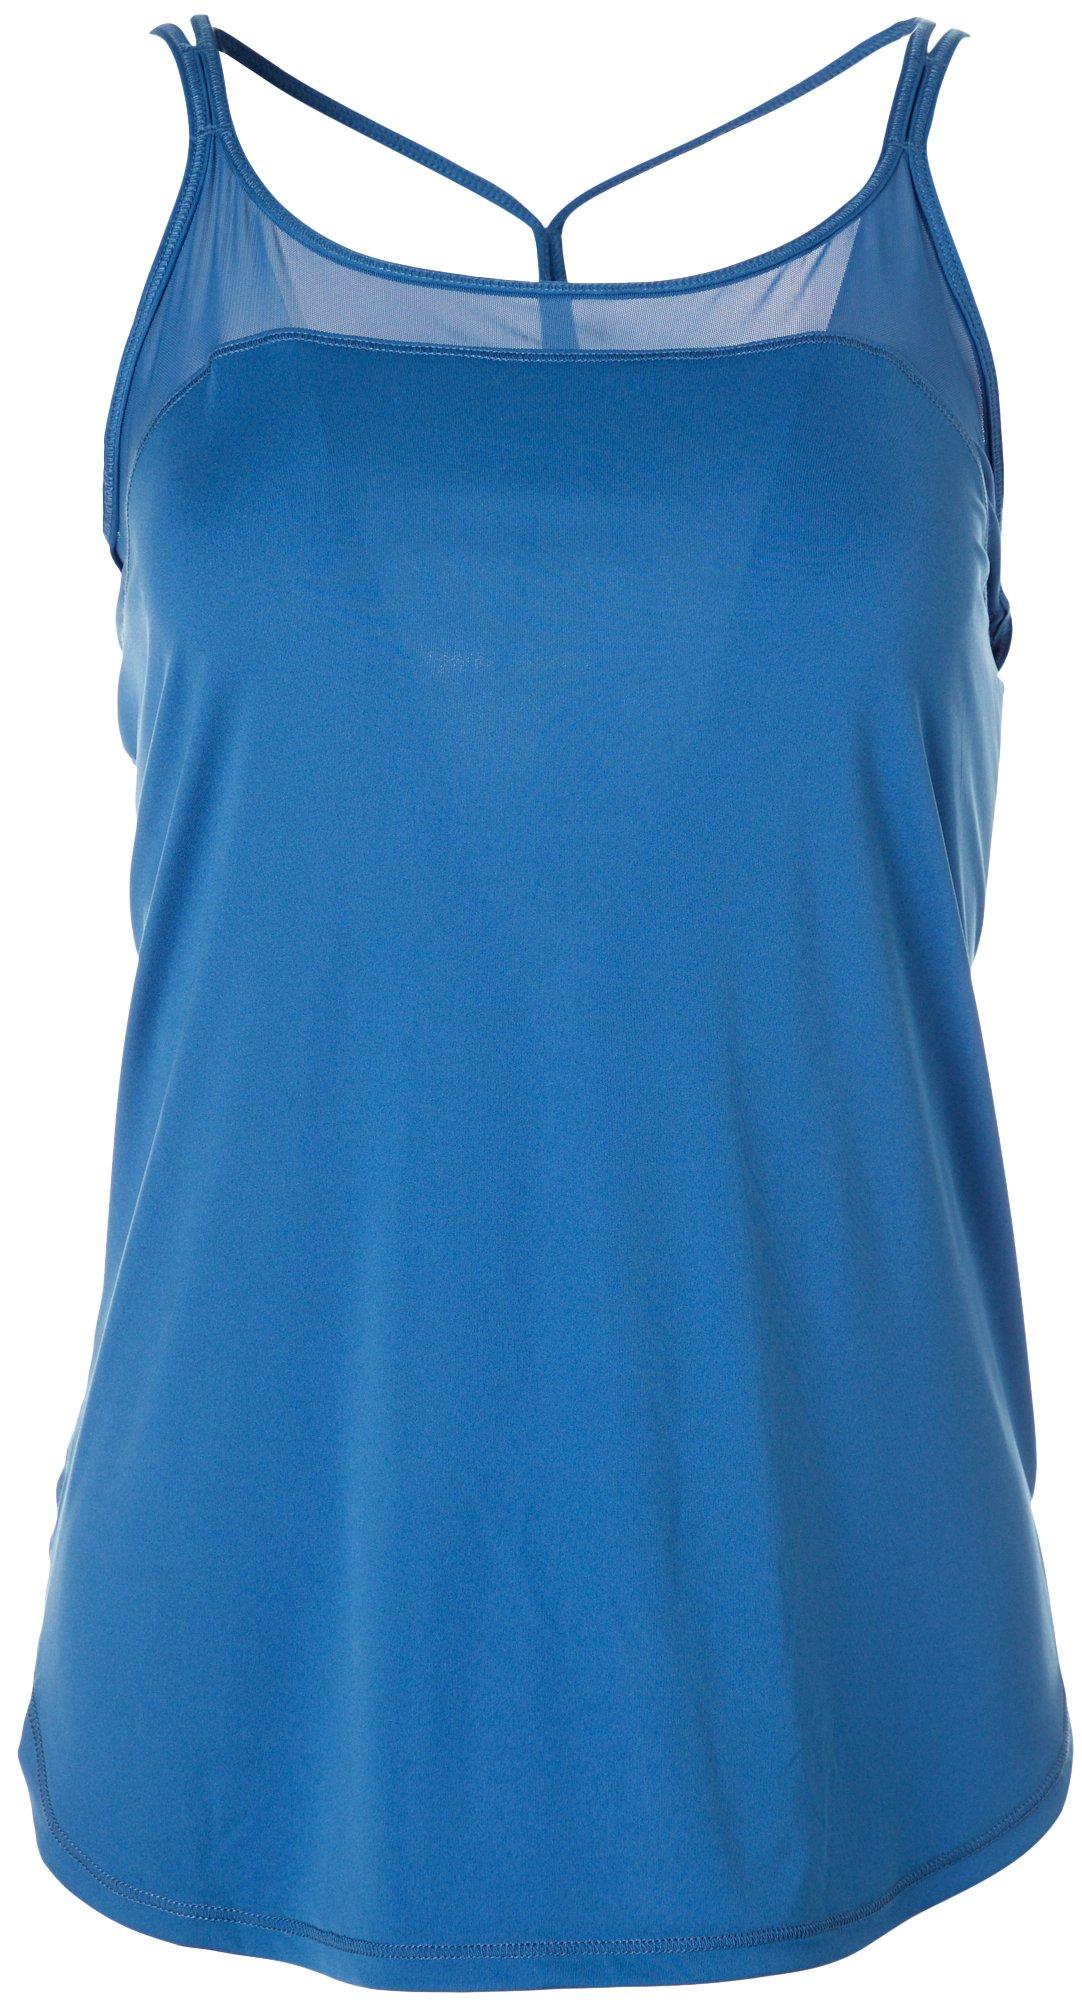 Rbx Womens Solid Mesh Trim Strappy Tank Top Bealls Florida - rbx offers.com/home